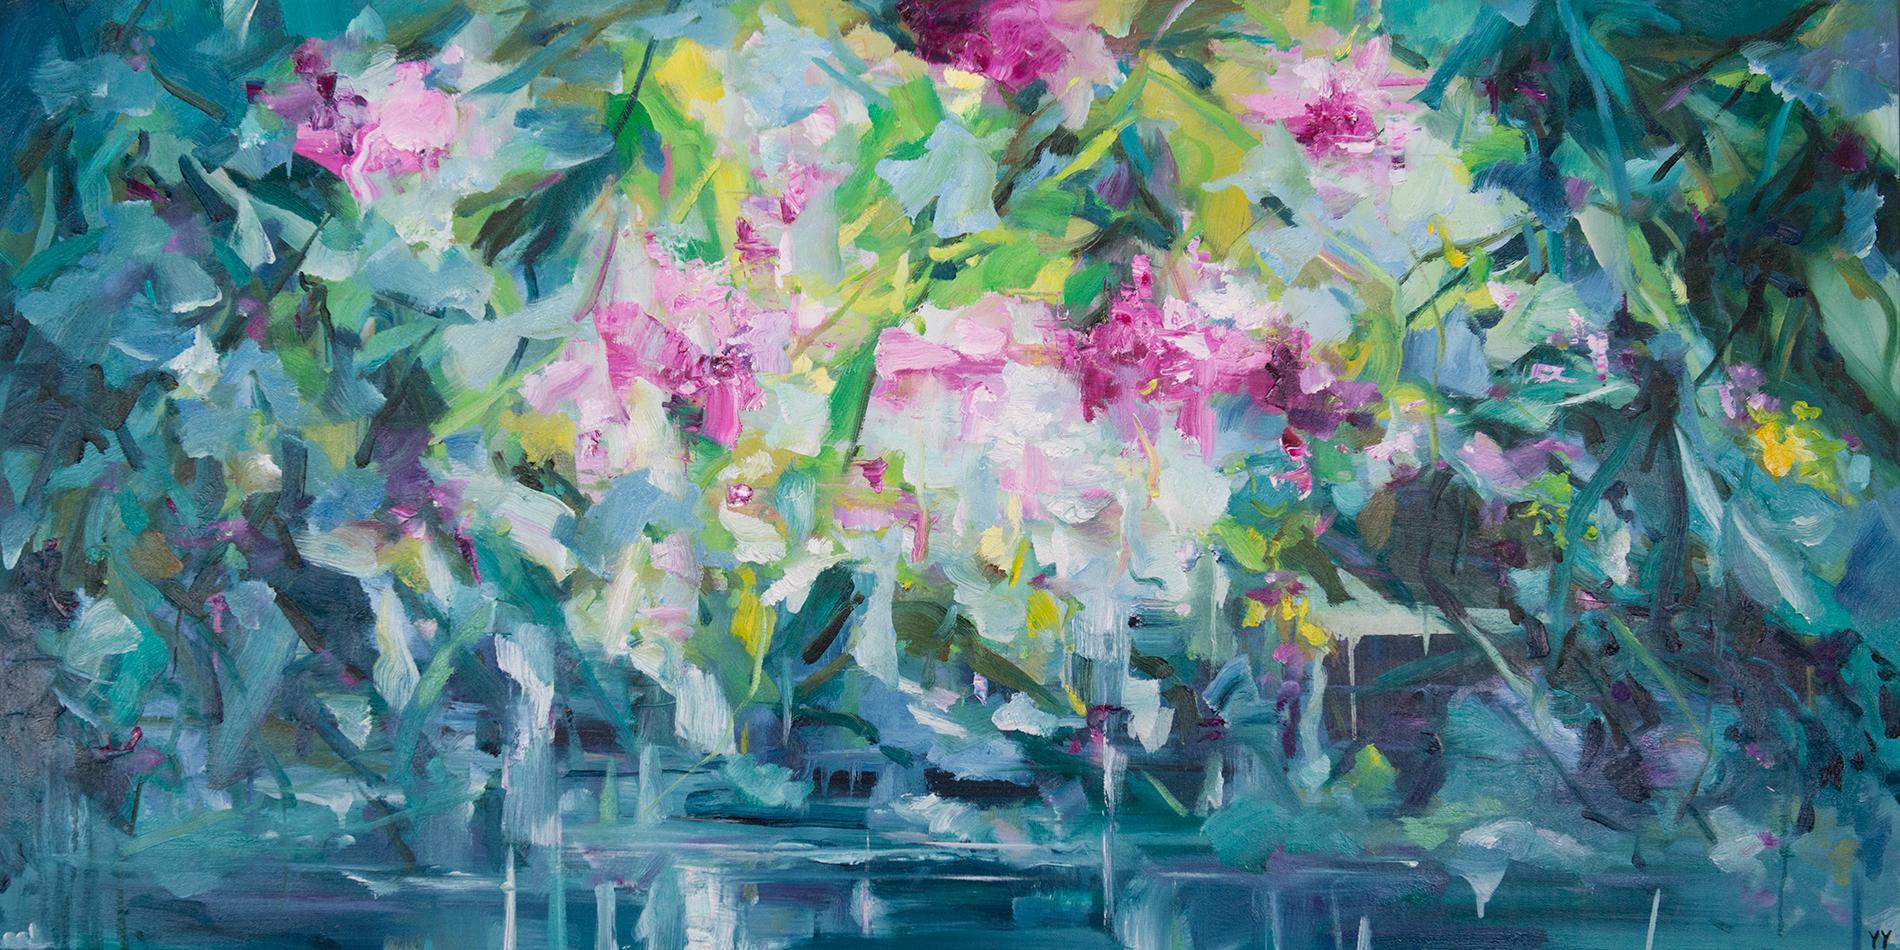 'Illusion of the Forest' 2023 by Chinese/Canadian artist Yangyang Pan. Oil on canvas, 30 x 60 in. / Frame: 31 x 61 in. This beautiful abstracted landscape painting incorporates gestural brushstrokes resembling a floral garden in deep colors of